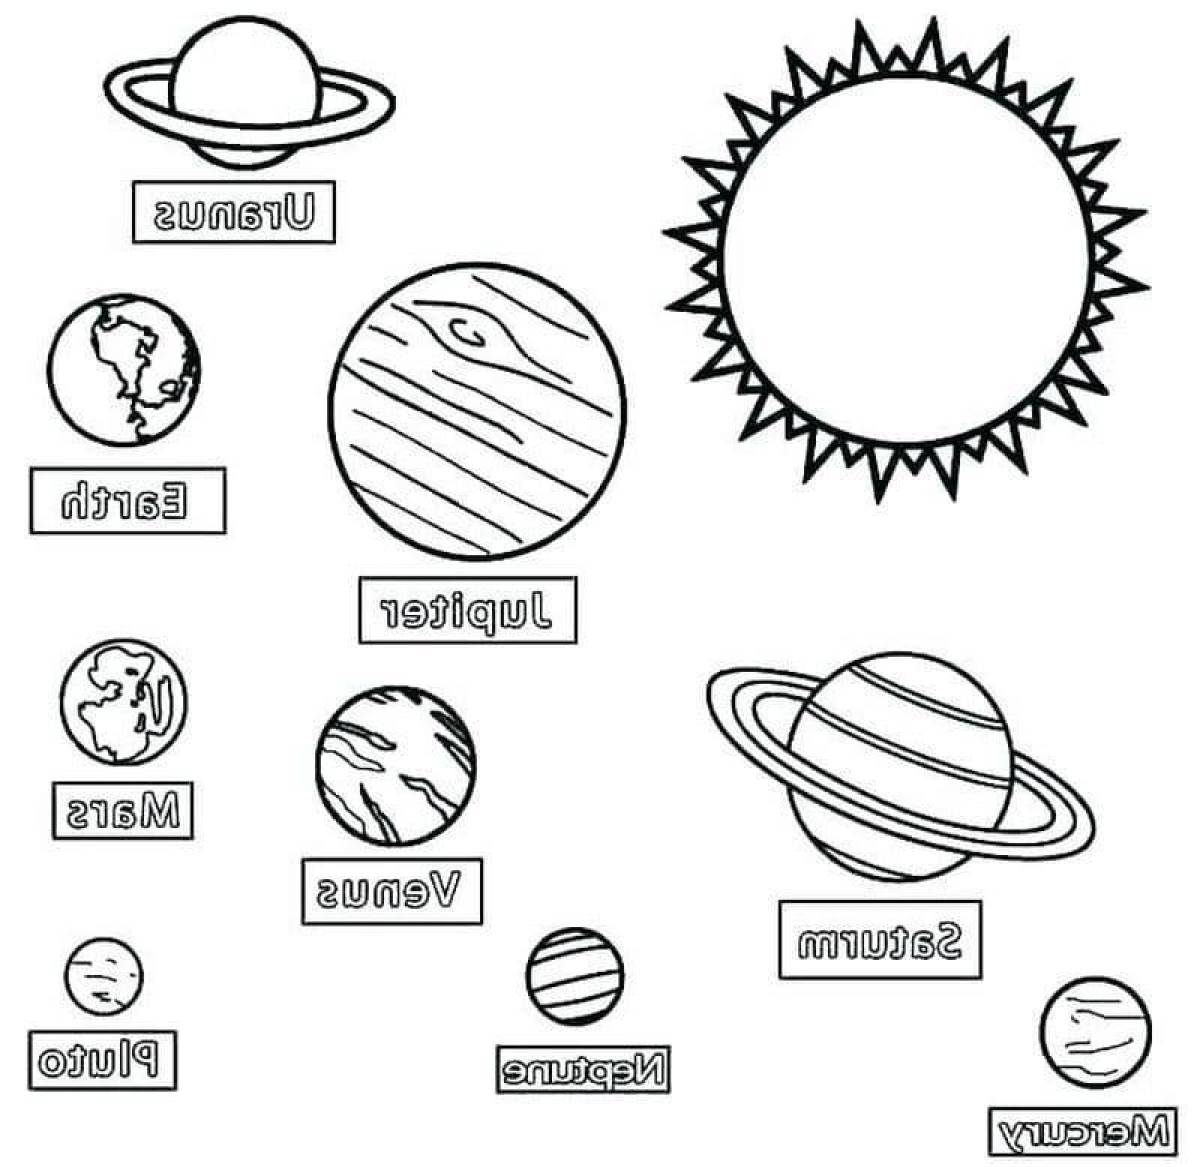 Planets of the solar system for kids #10